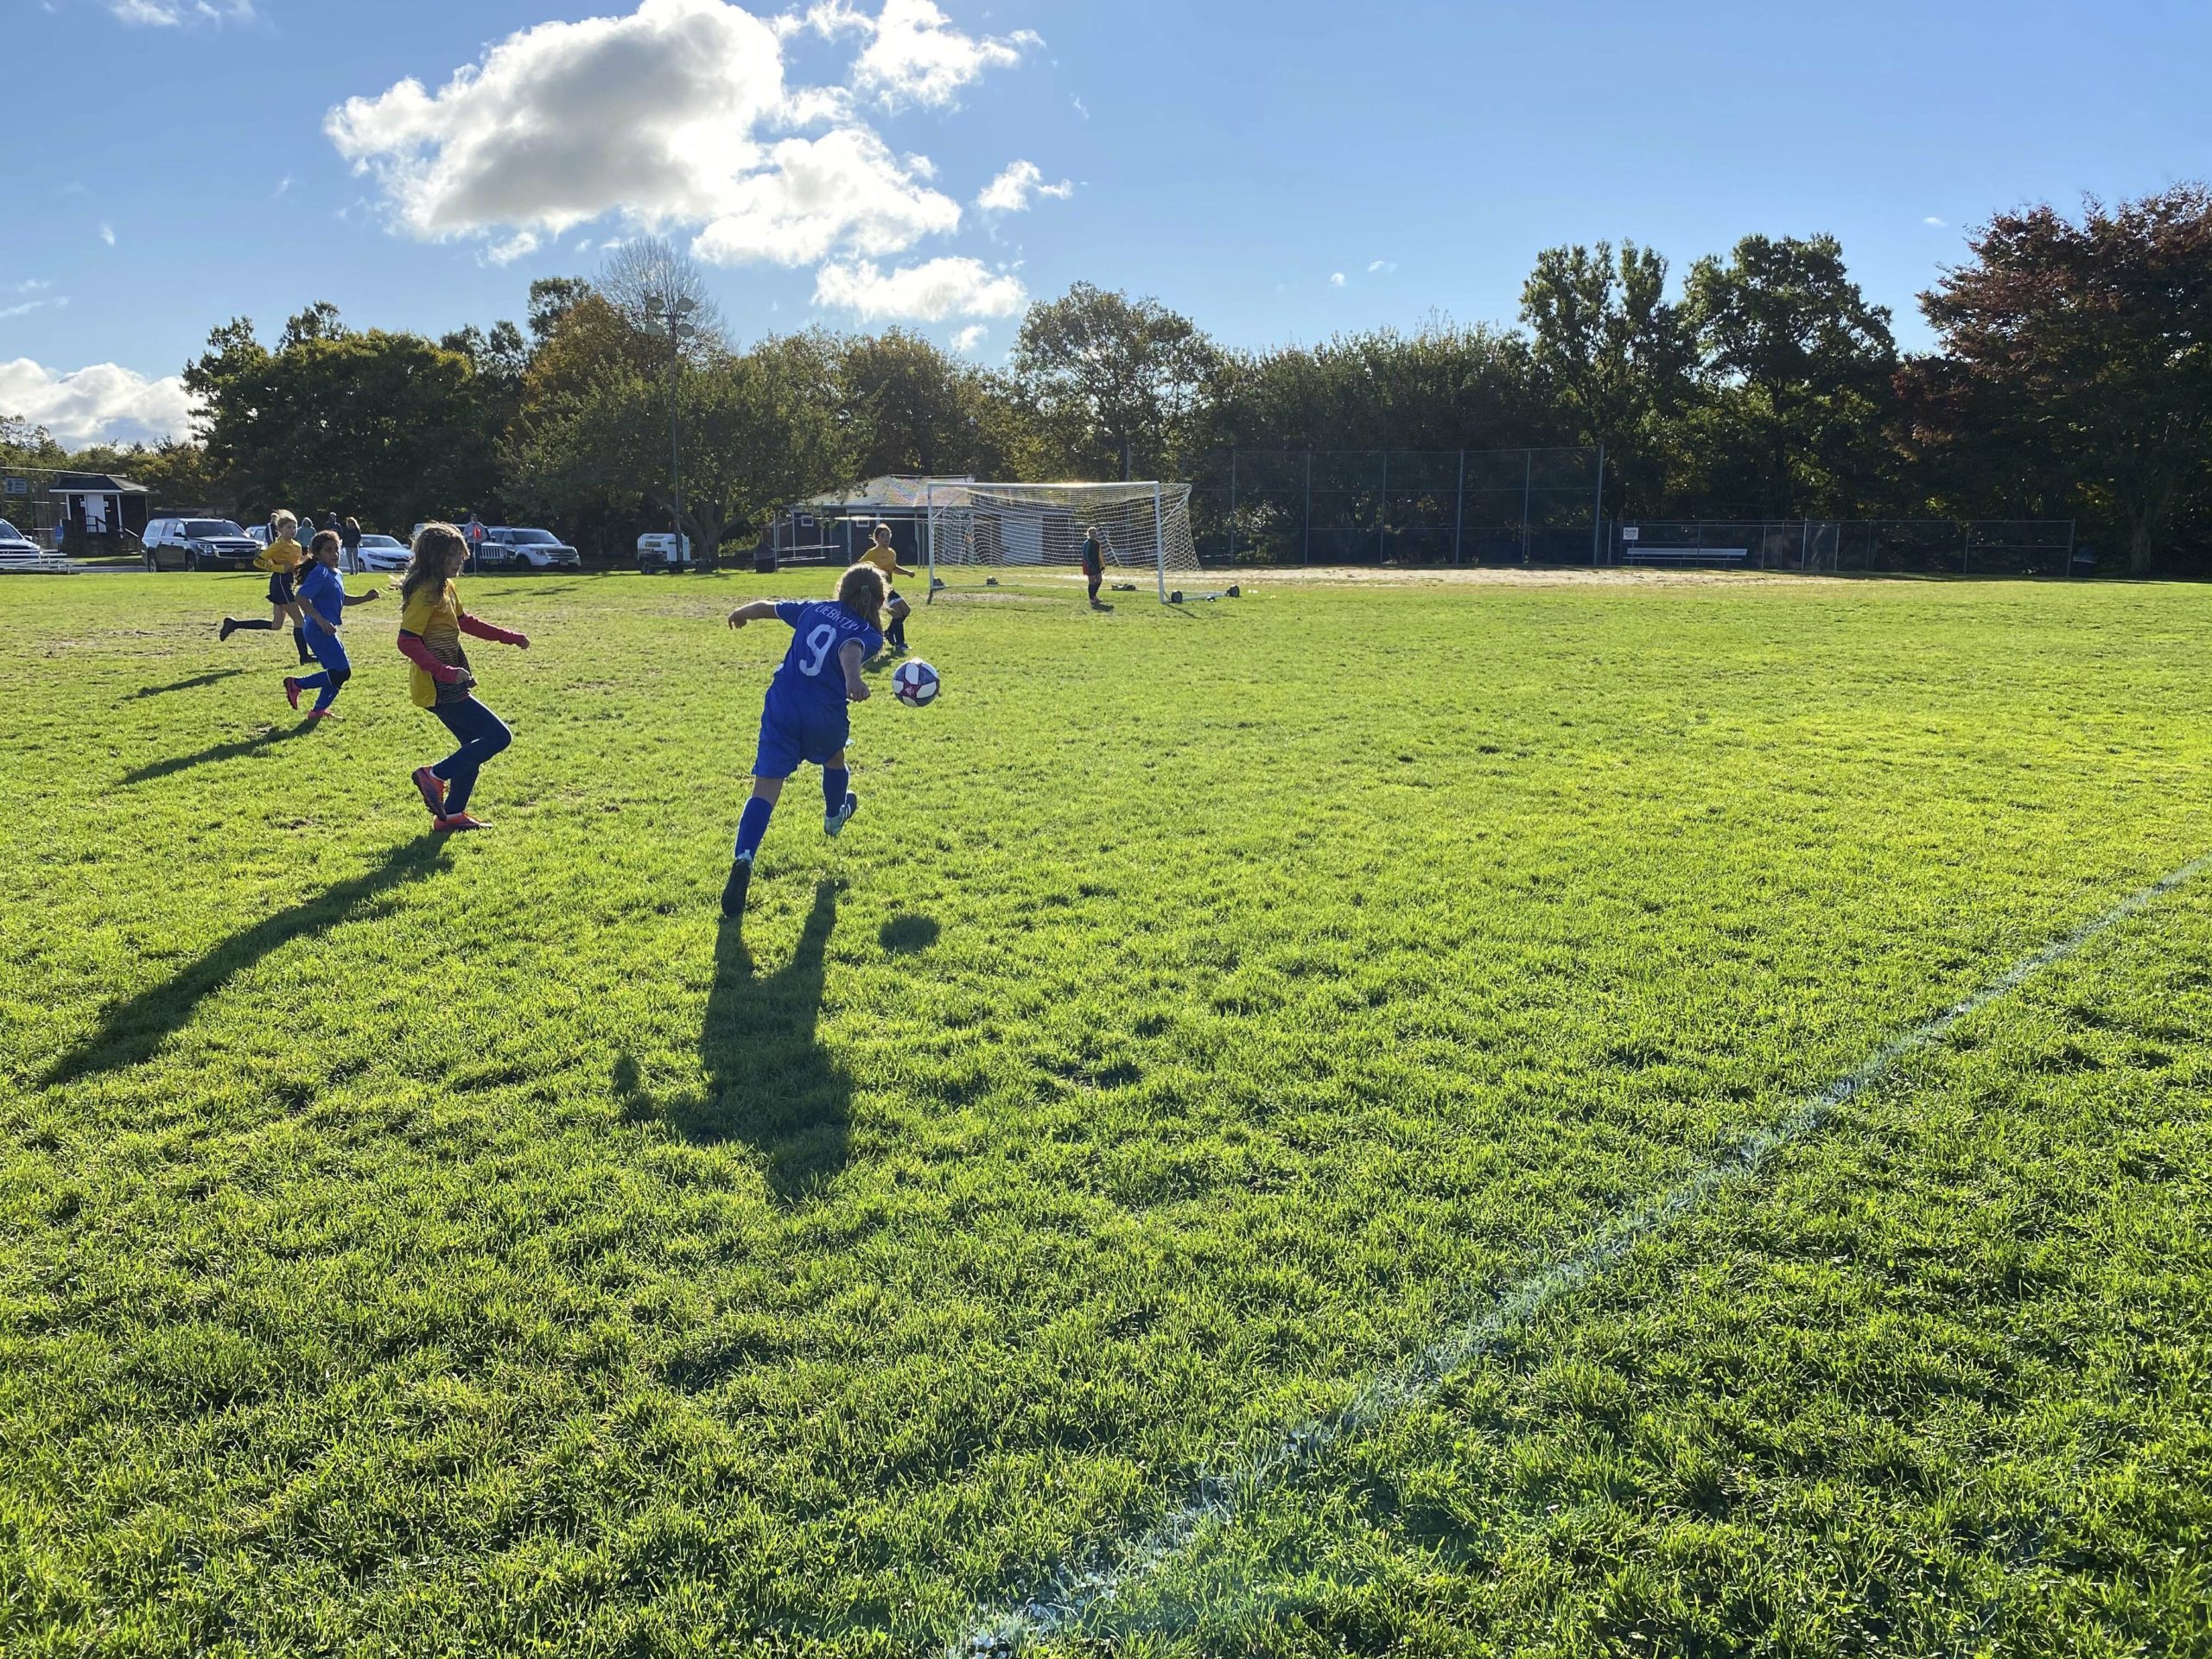 Southampton Soccer Club players were happy to be back on the field this fall, with Covid safety measures in place, after the cancellation of the season in the spring.